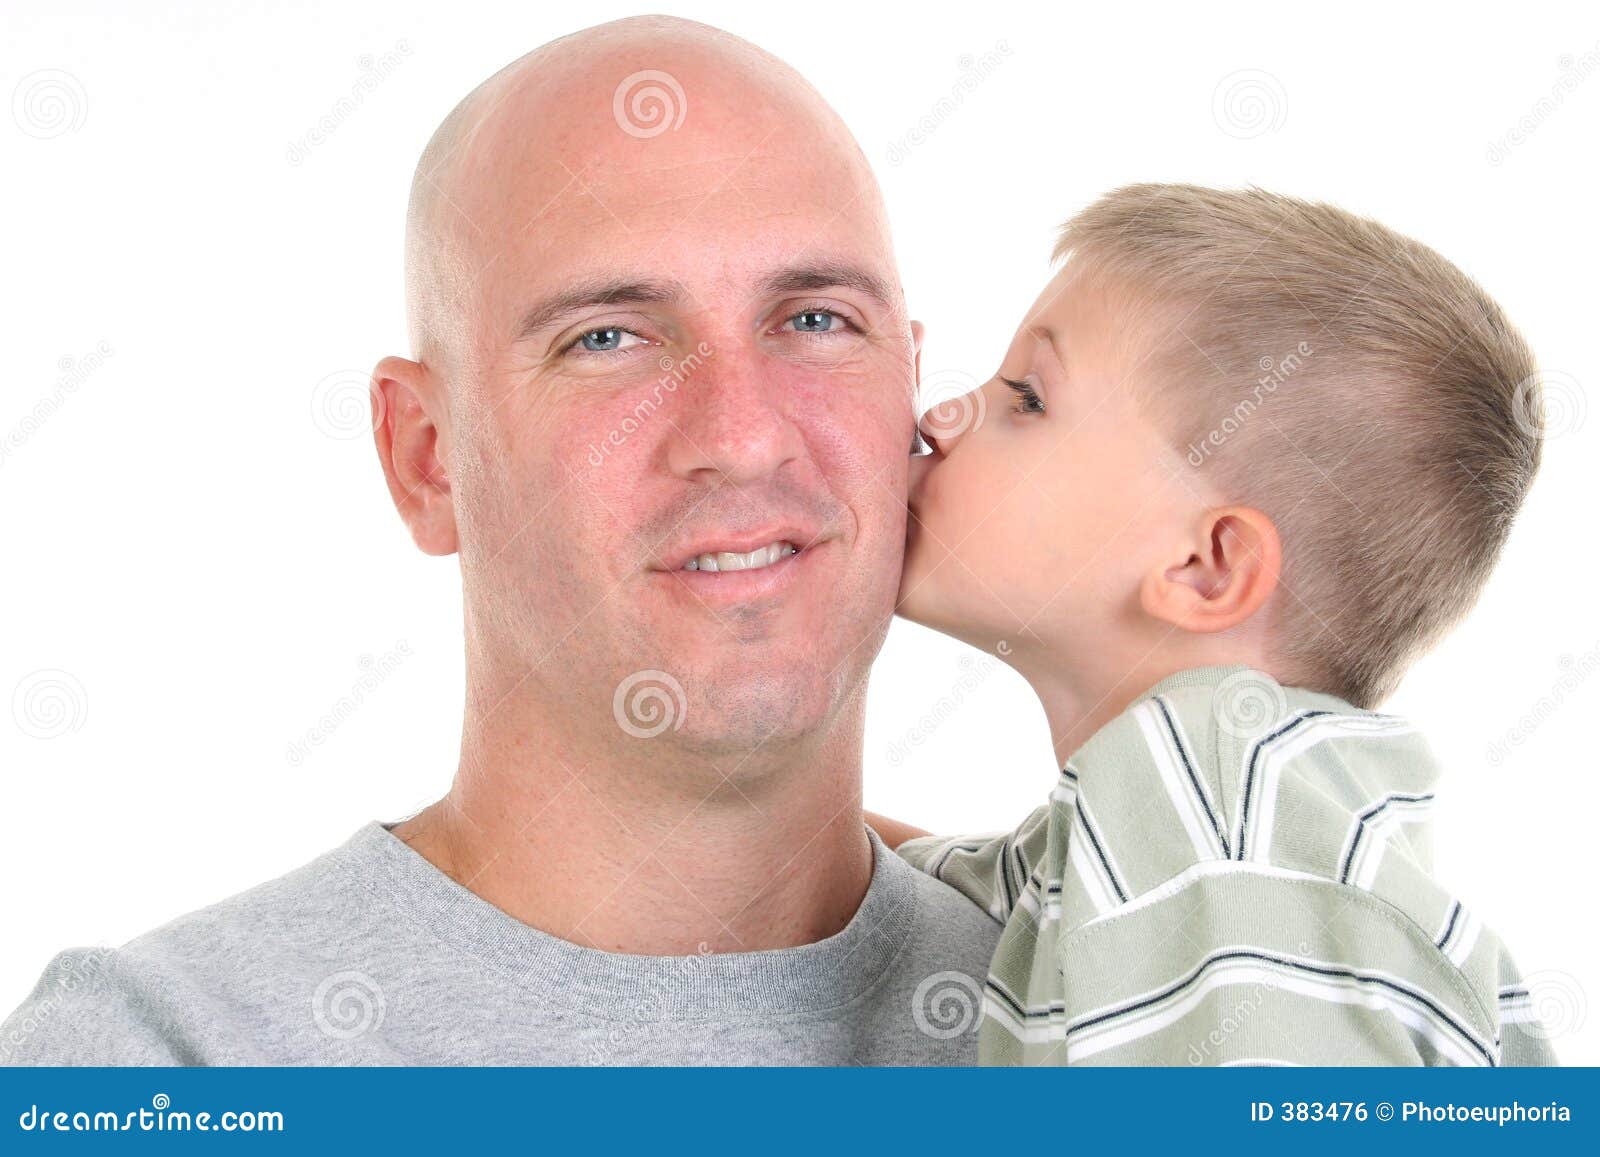 Son Kissing Dad On The Cheek. Four year old boy kissing his dad on the cheek. Close-up, headshot over white.